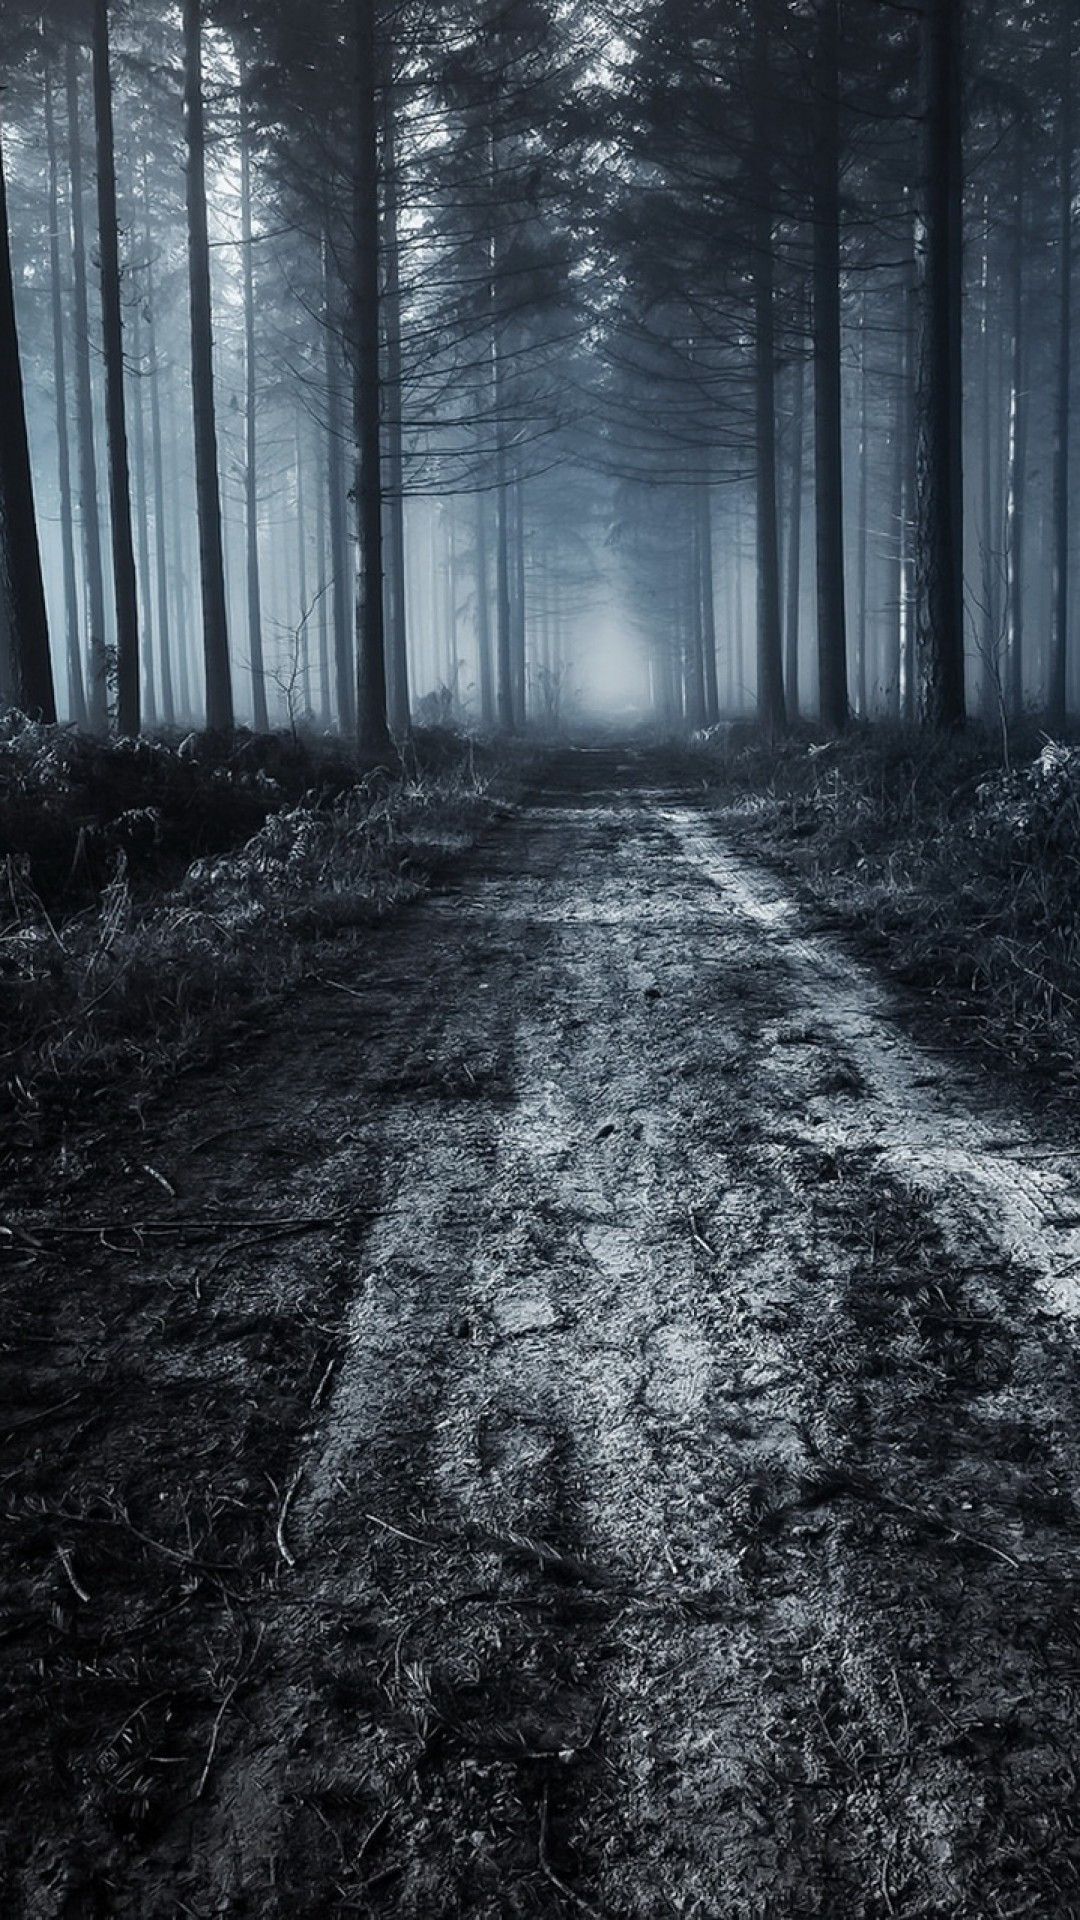 A dark path in a forest with fog. - Woods